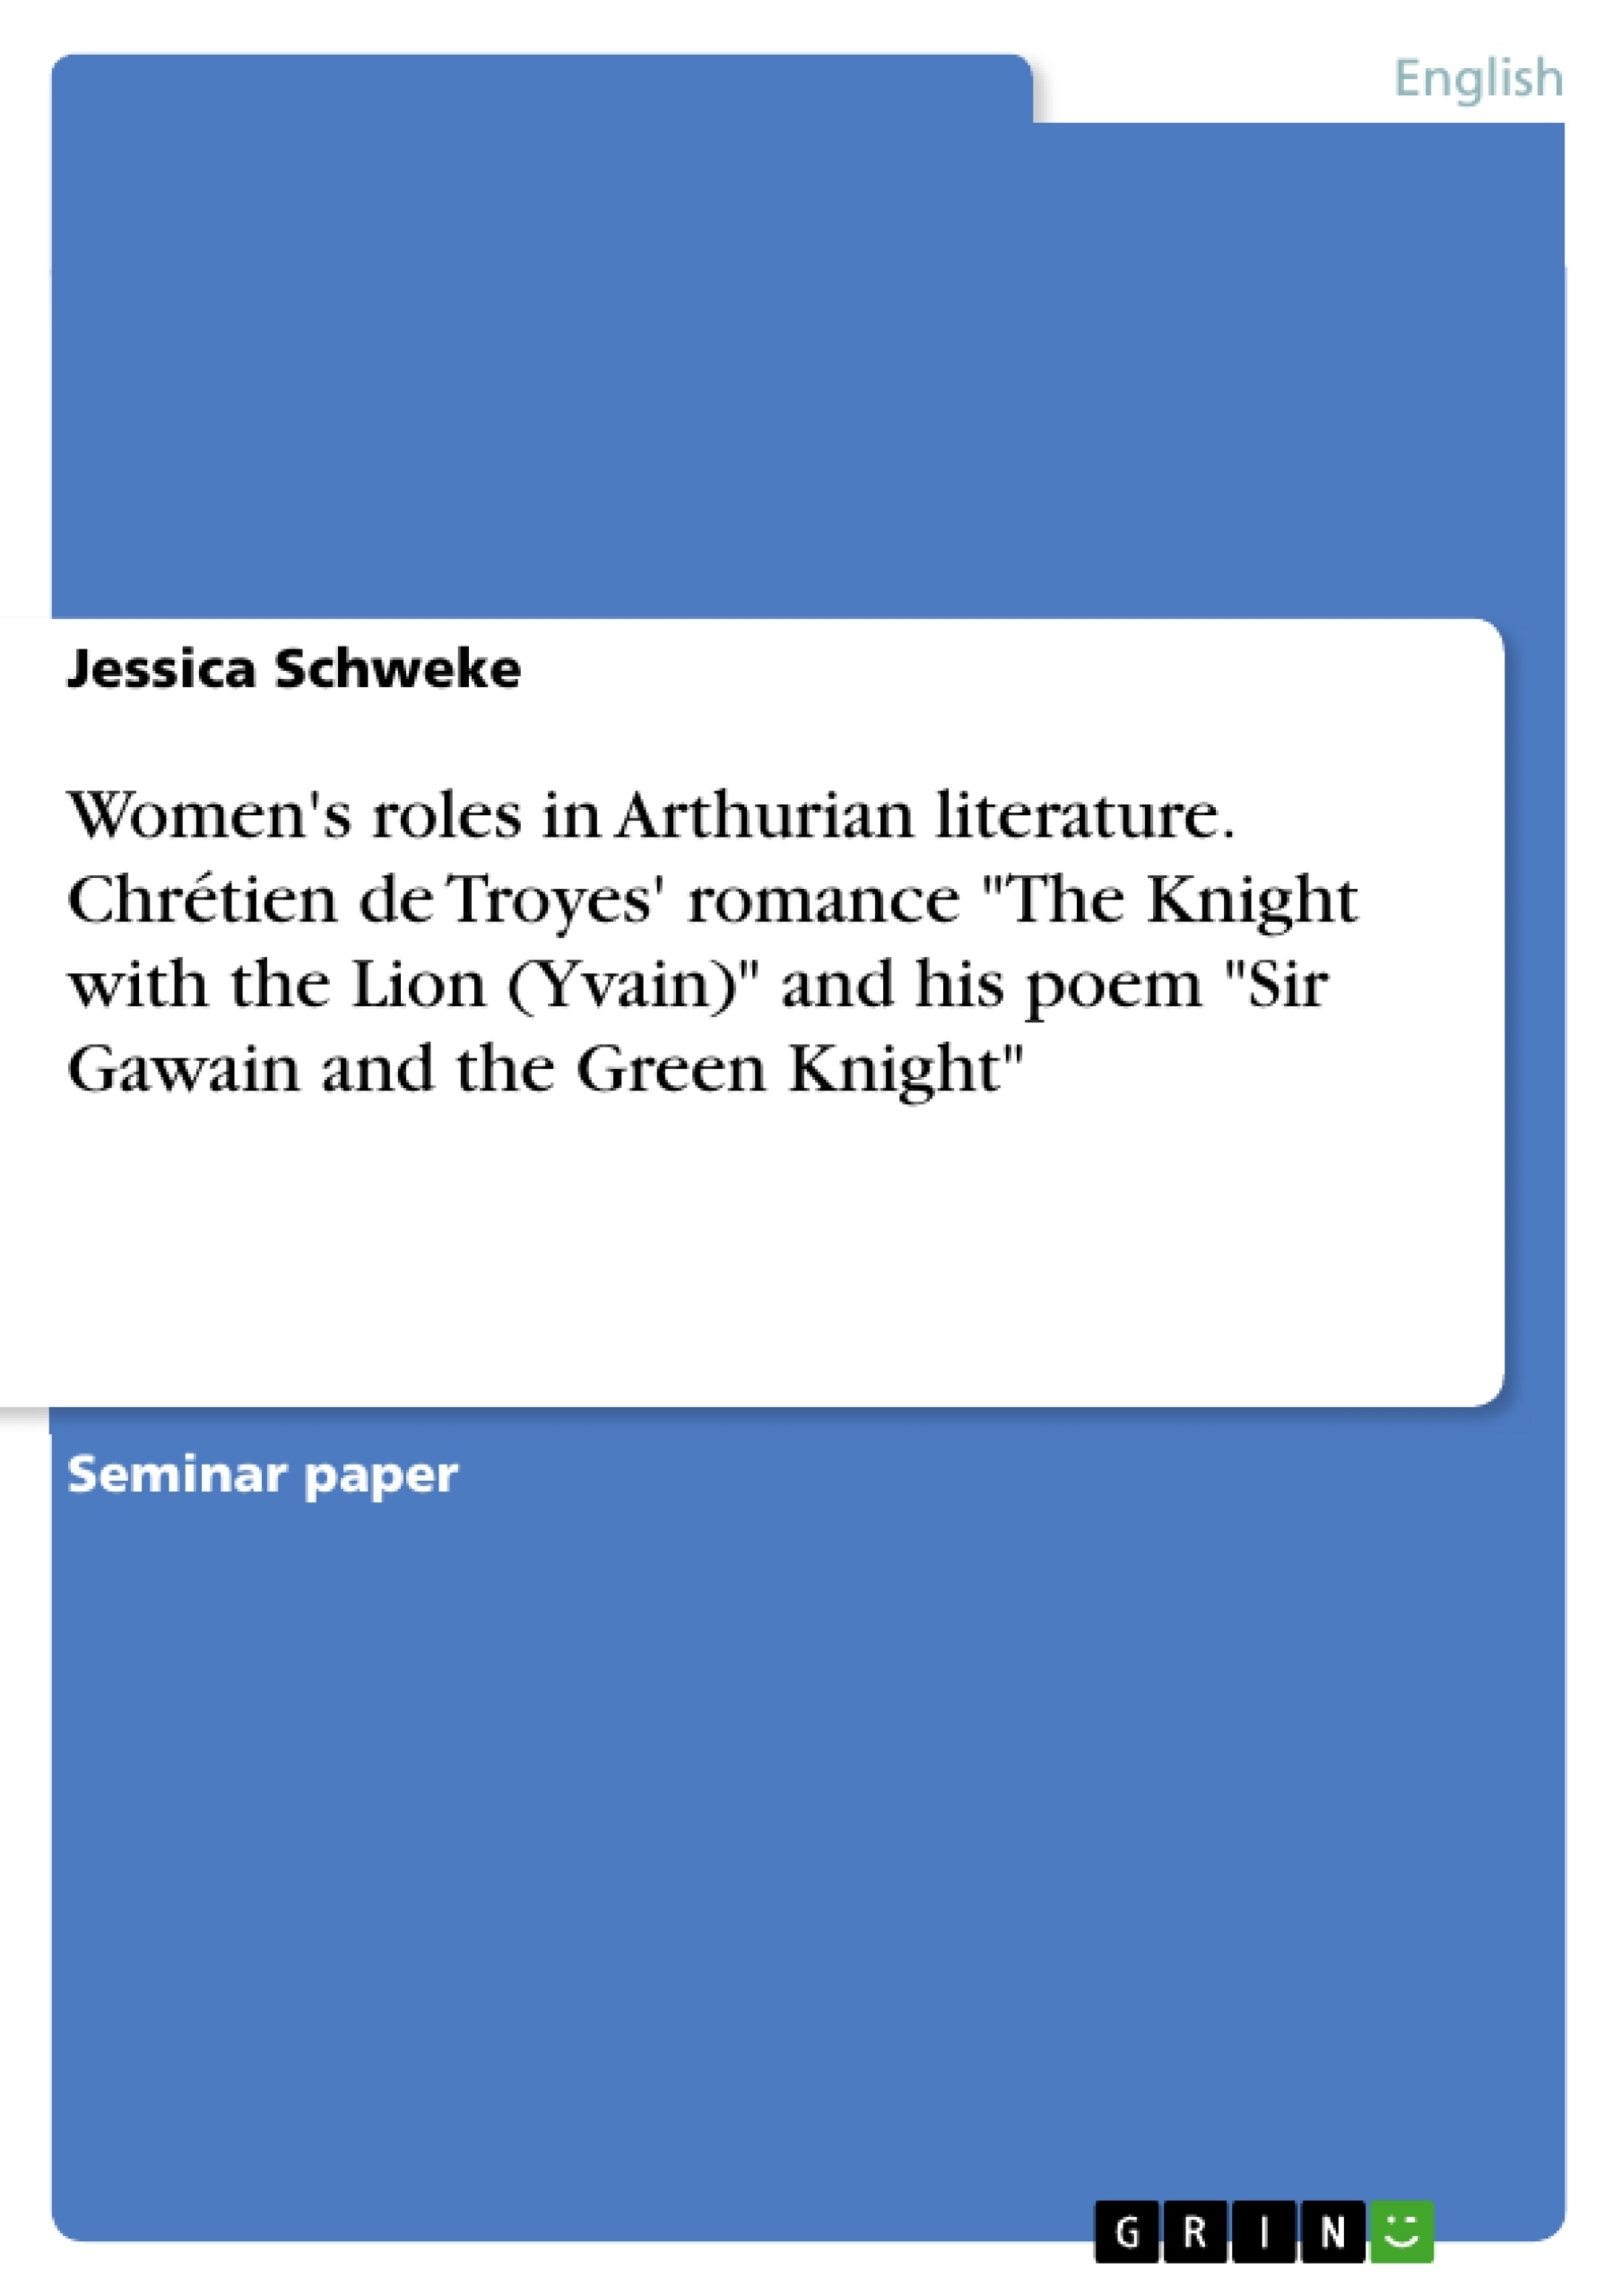 Title: Women's roles in Arthurian literature. Chrétien de Troyes' romance "The Knight with the Lion (Yvain)" and his poem "Sir Gawain and the Green Knight"